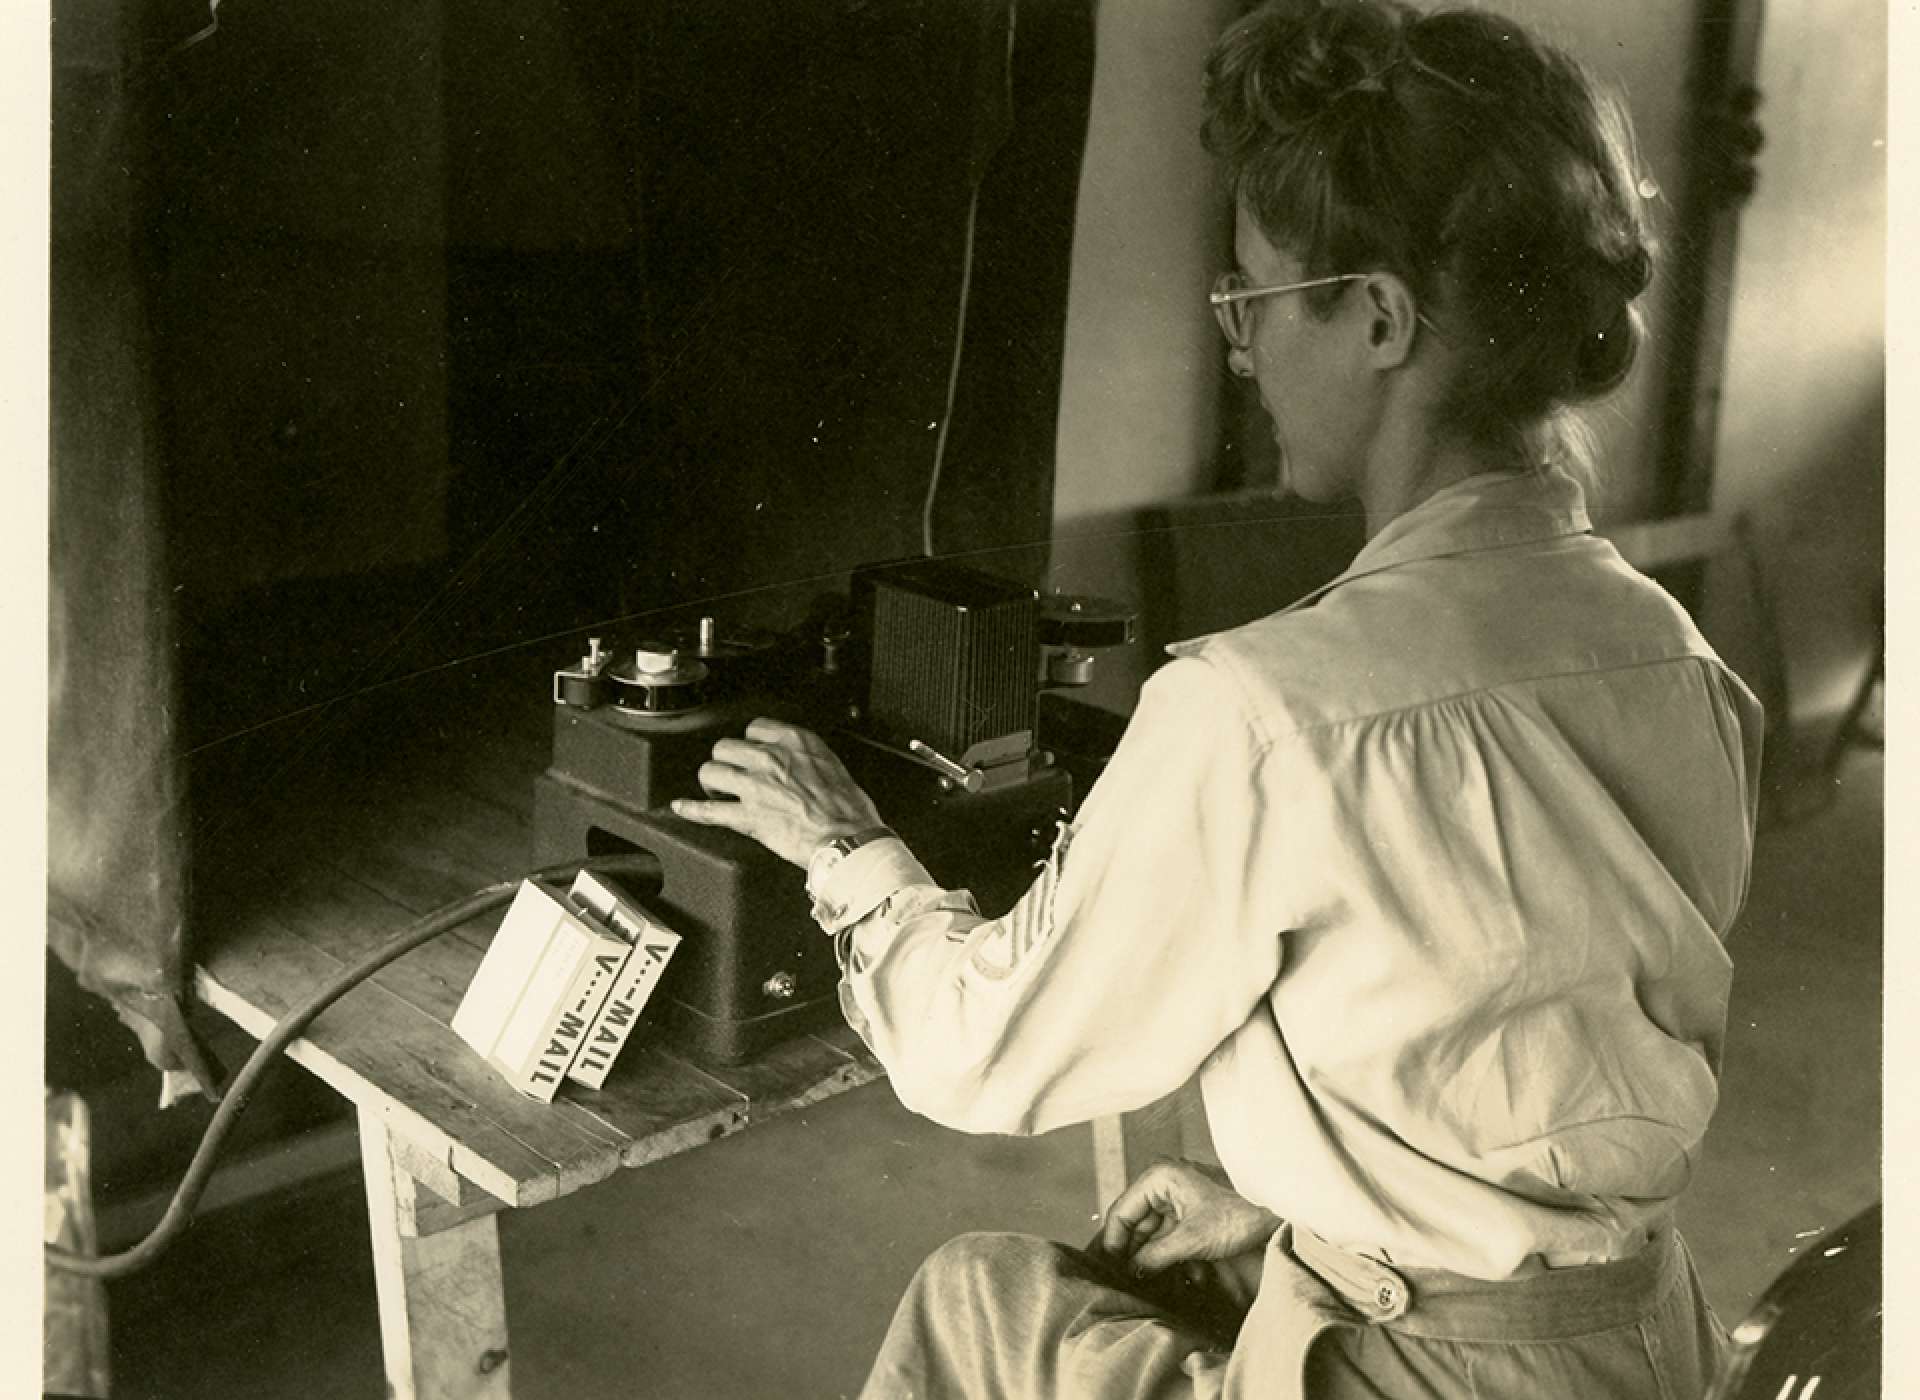 V-mail operation in the field at APO 929.”After processing the film is taken to inspection where it is carefully examined on a projection machine, for any flaws which may have occurred either during the recording or in developing. These bad letters are then punched out and tallied, so they can be re-photographed on a later roll.”